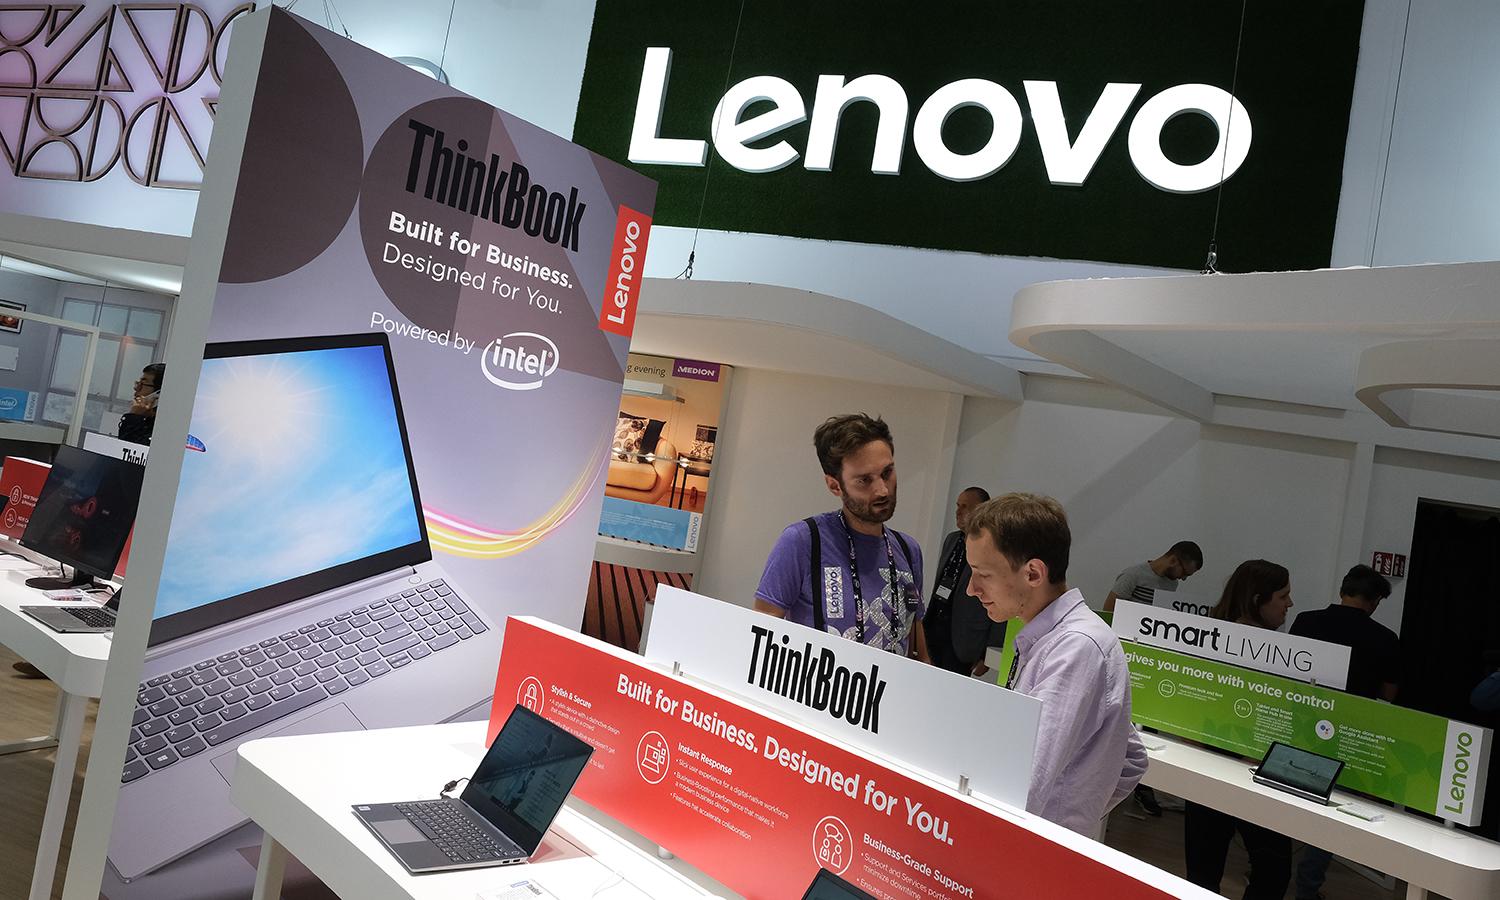 A visitor looks at new laptop computers on display at the Lenovo stand at the 2019 IFA home electronics and appliances trade fair on Sept. 6, 2019, in Berlin. (Photo by Sean Gallup/Getty Images)